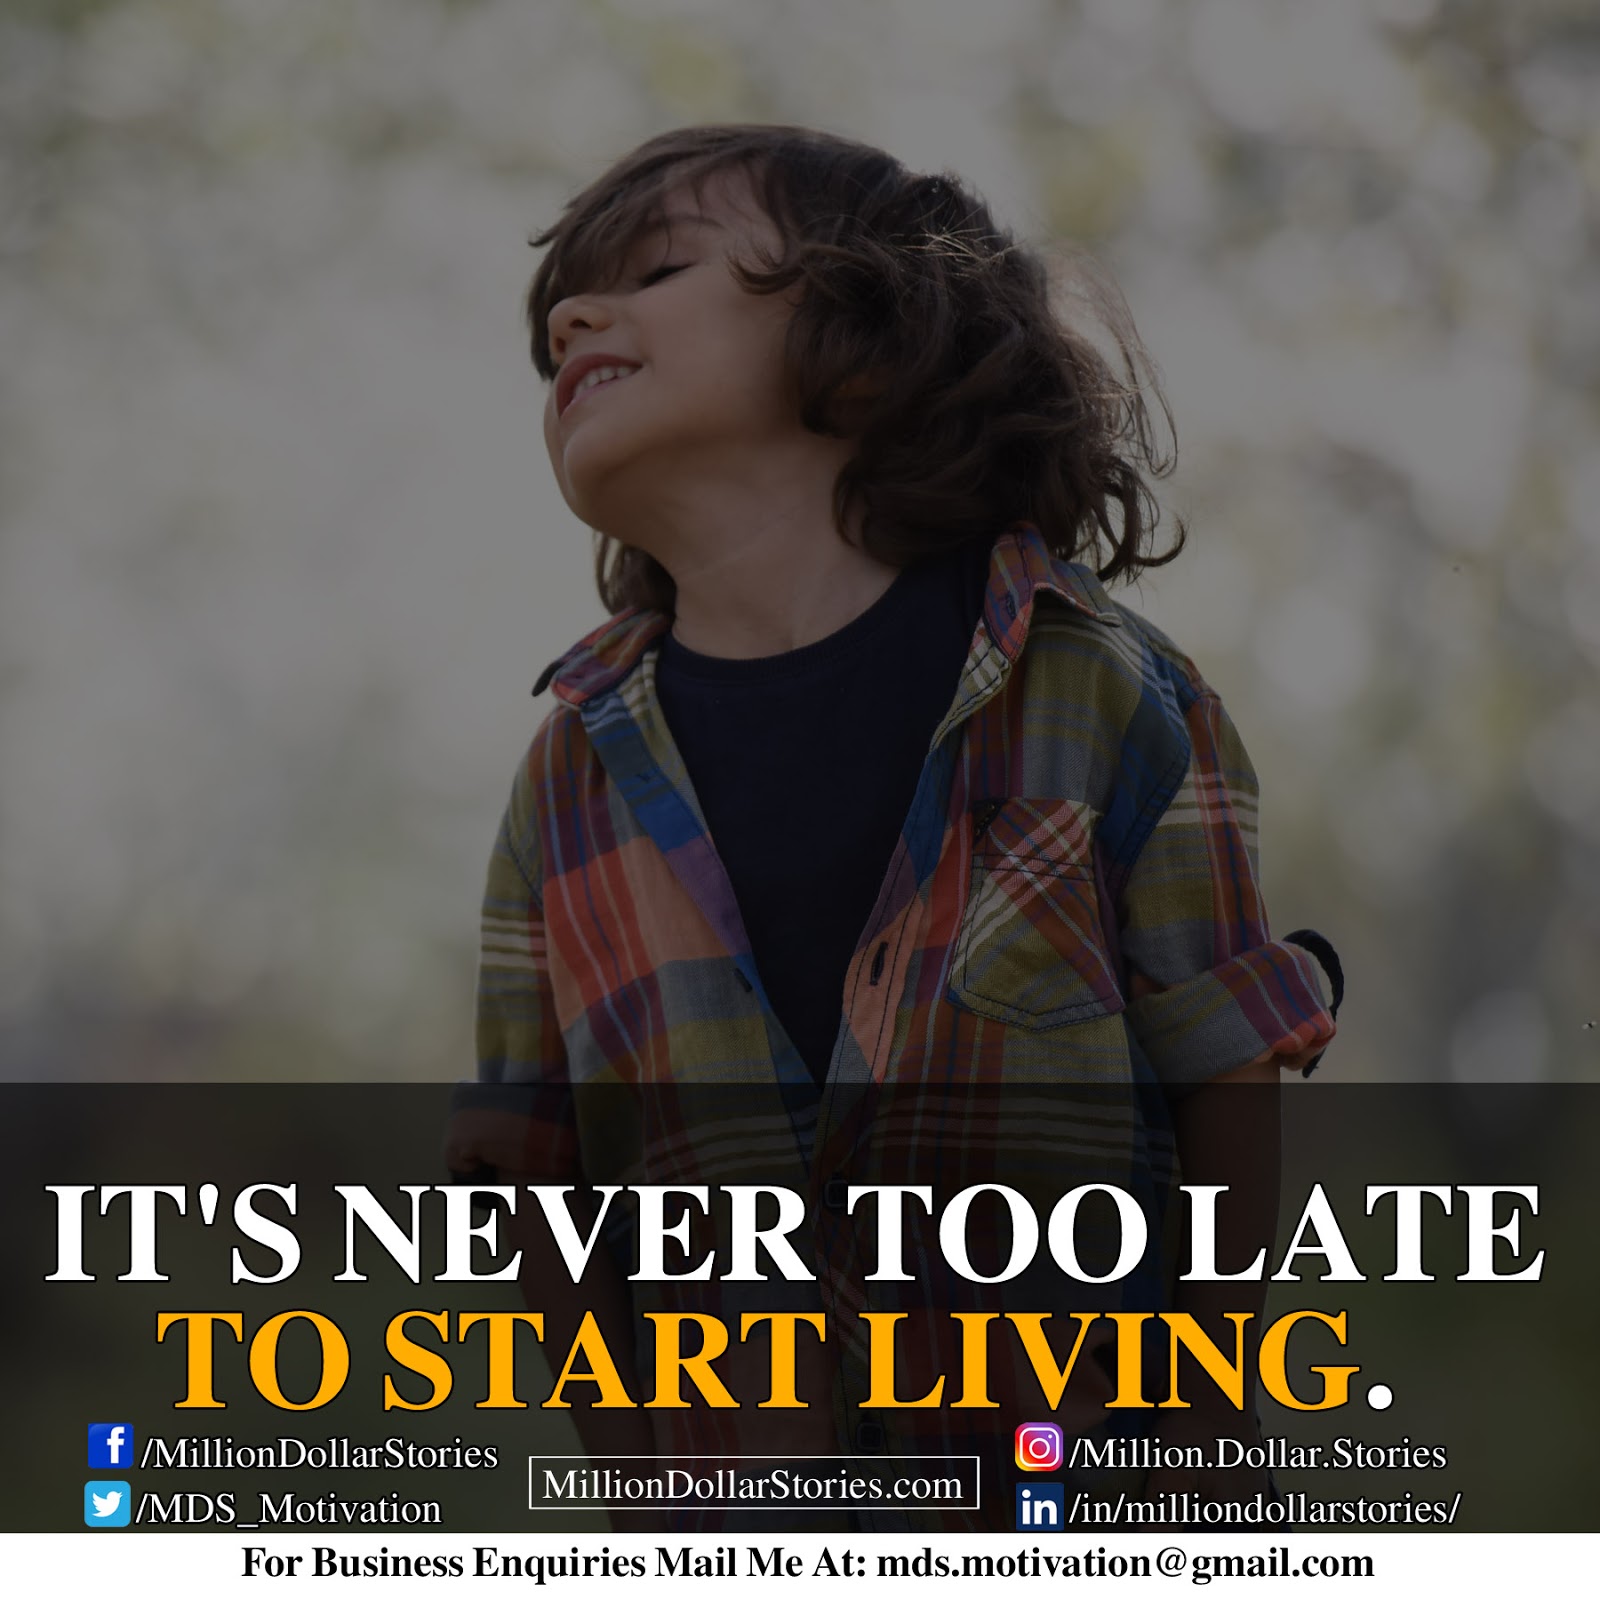 IT'S NEVER TOO LATE TP START LIVING.